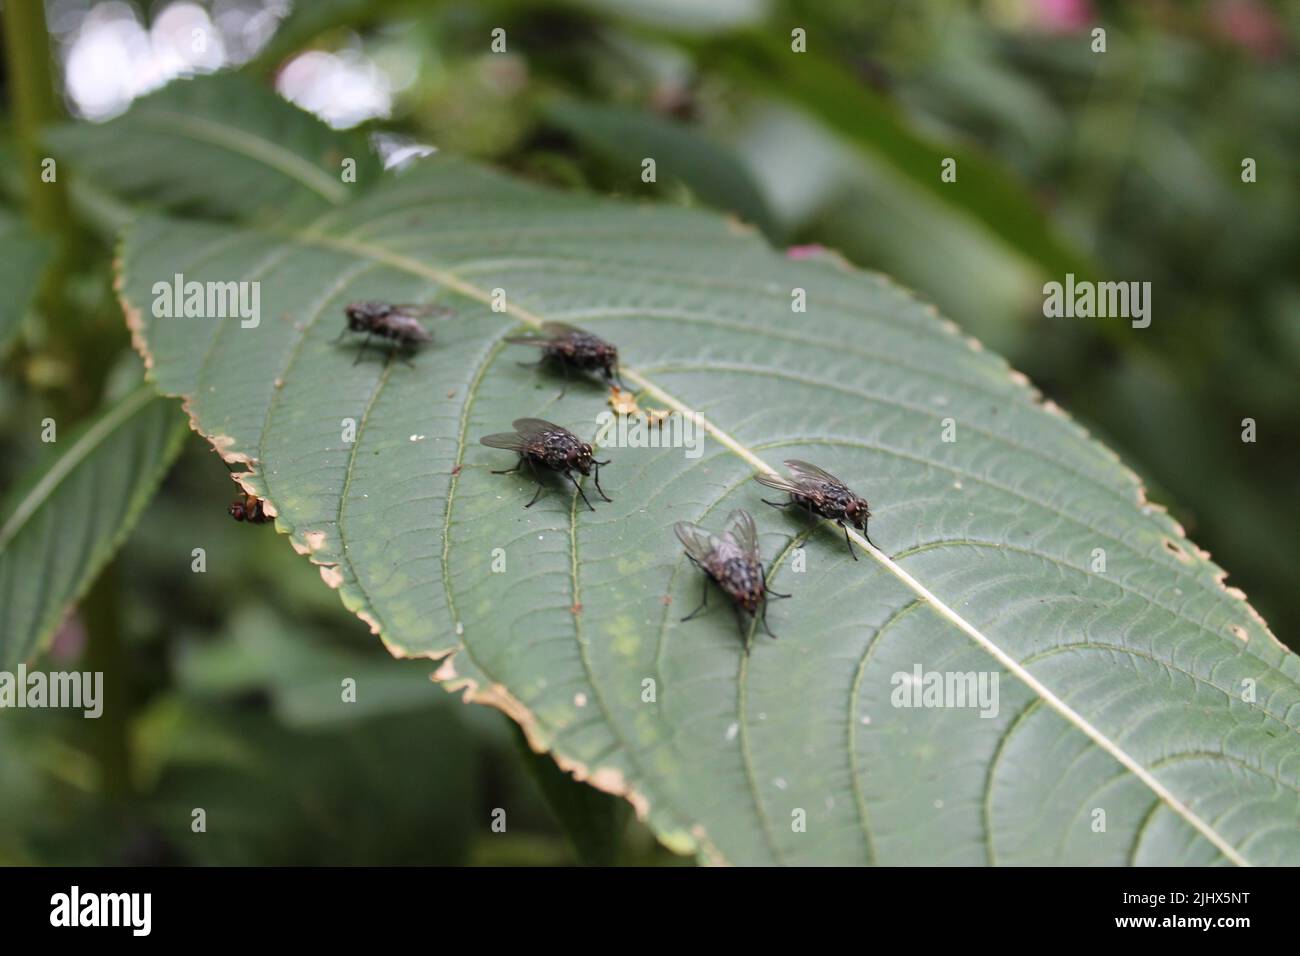 A closeup shot of common houseflies sitting on a leaf Stock Photo